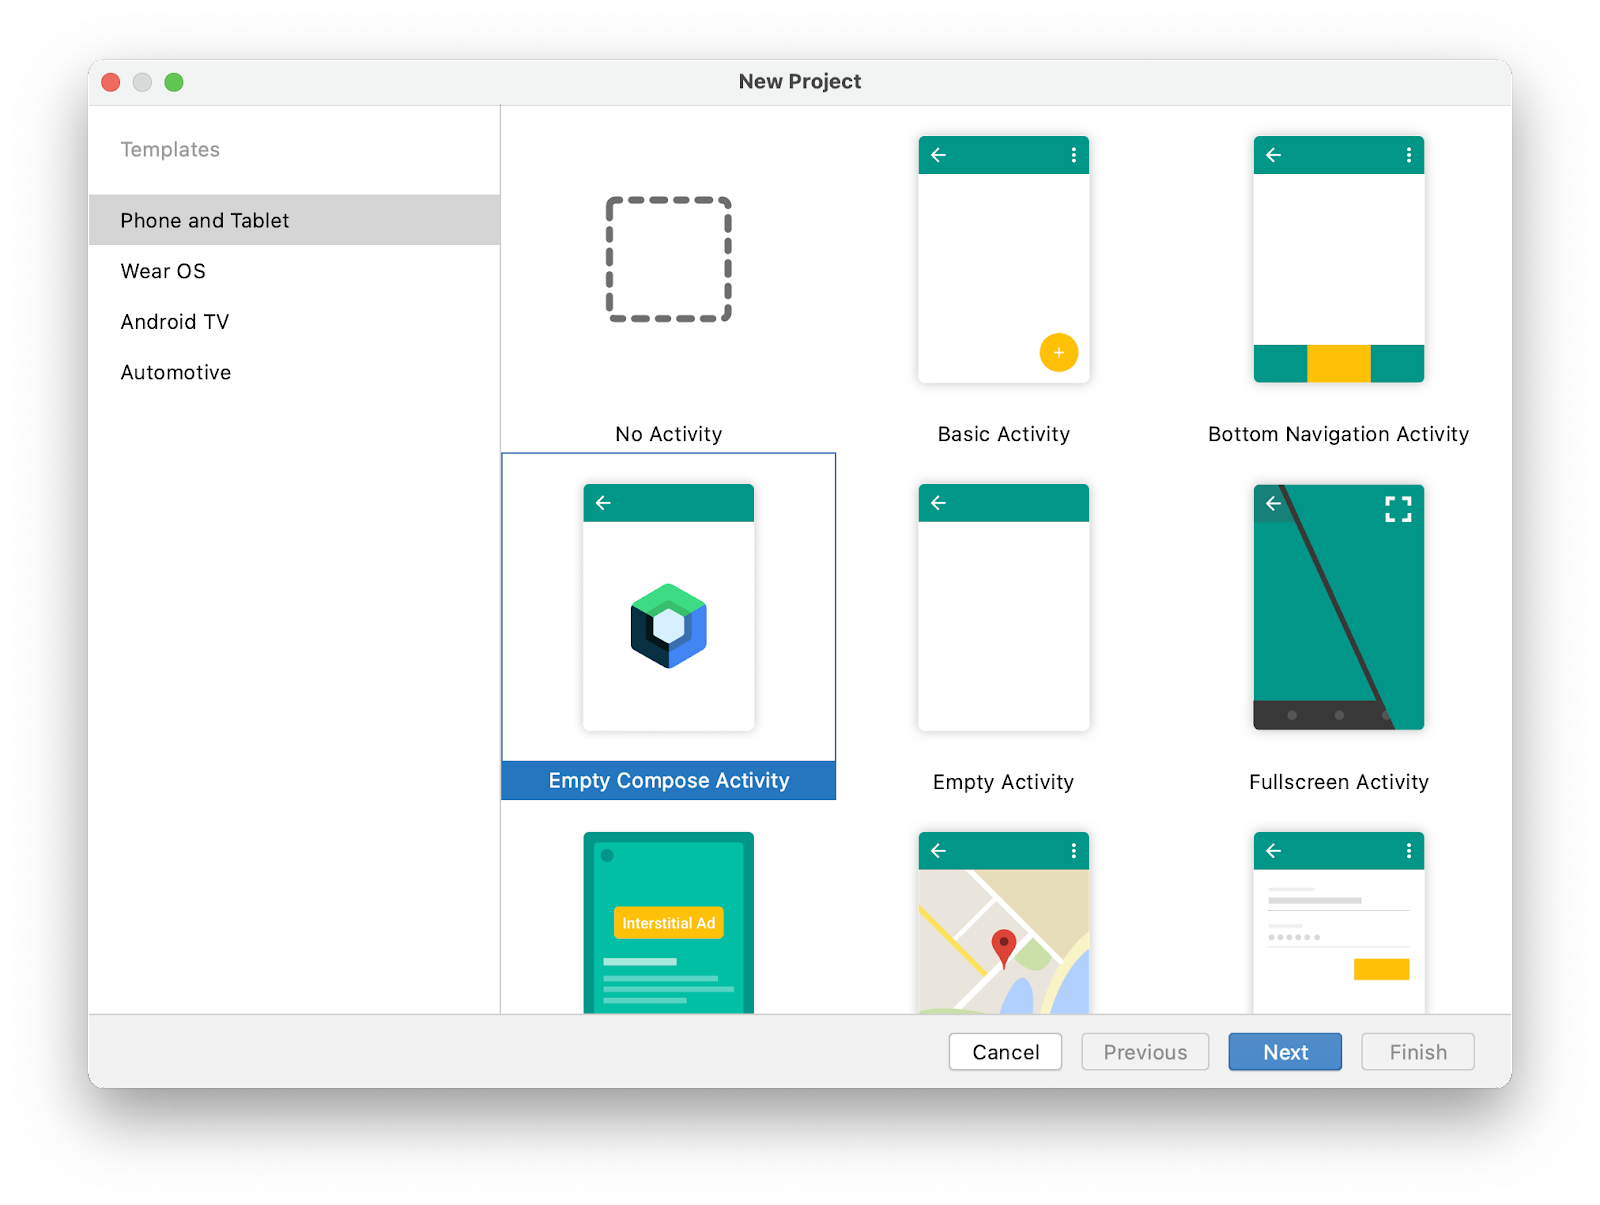 This image shows the New project window, which includes templates to make apps for phones and tablets, Wear OS, Android TV, and Automotive. 